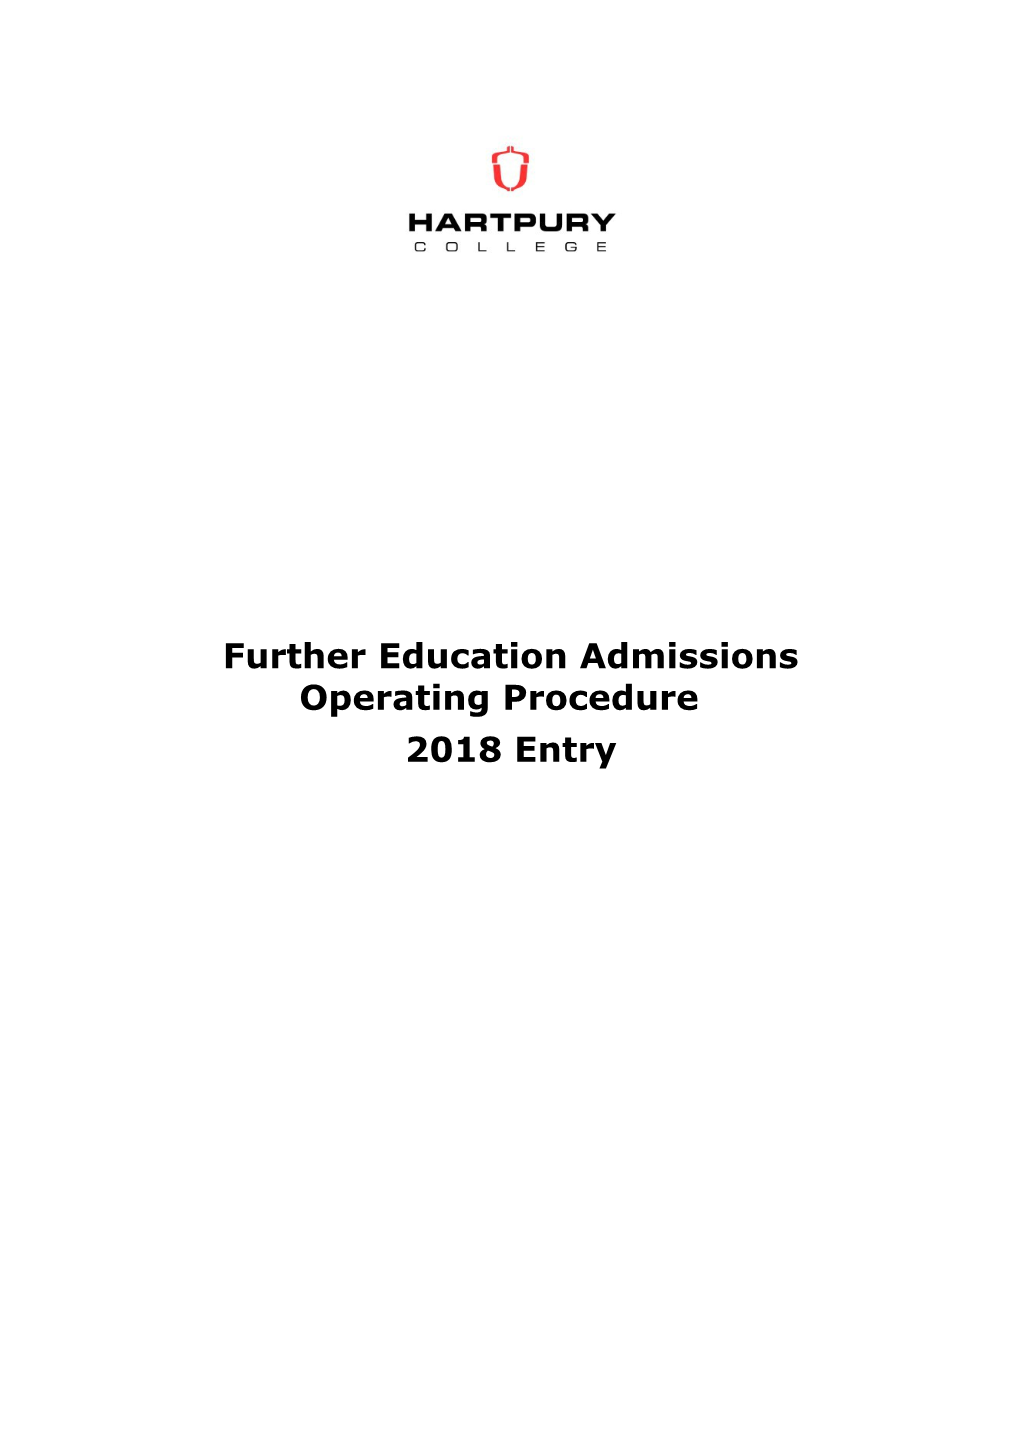 Further Education Admissions Operating Procedure